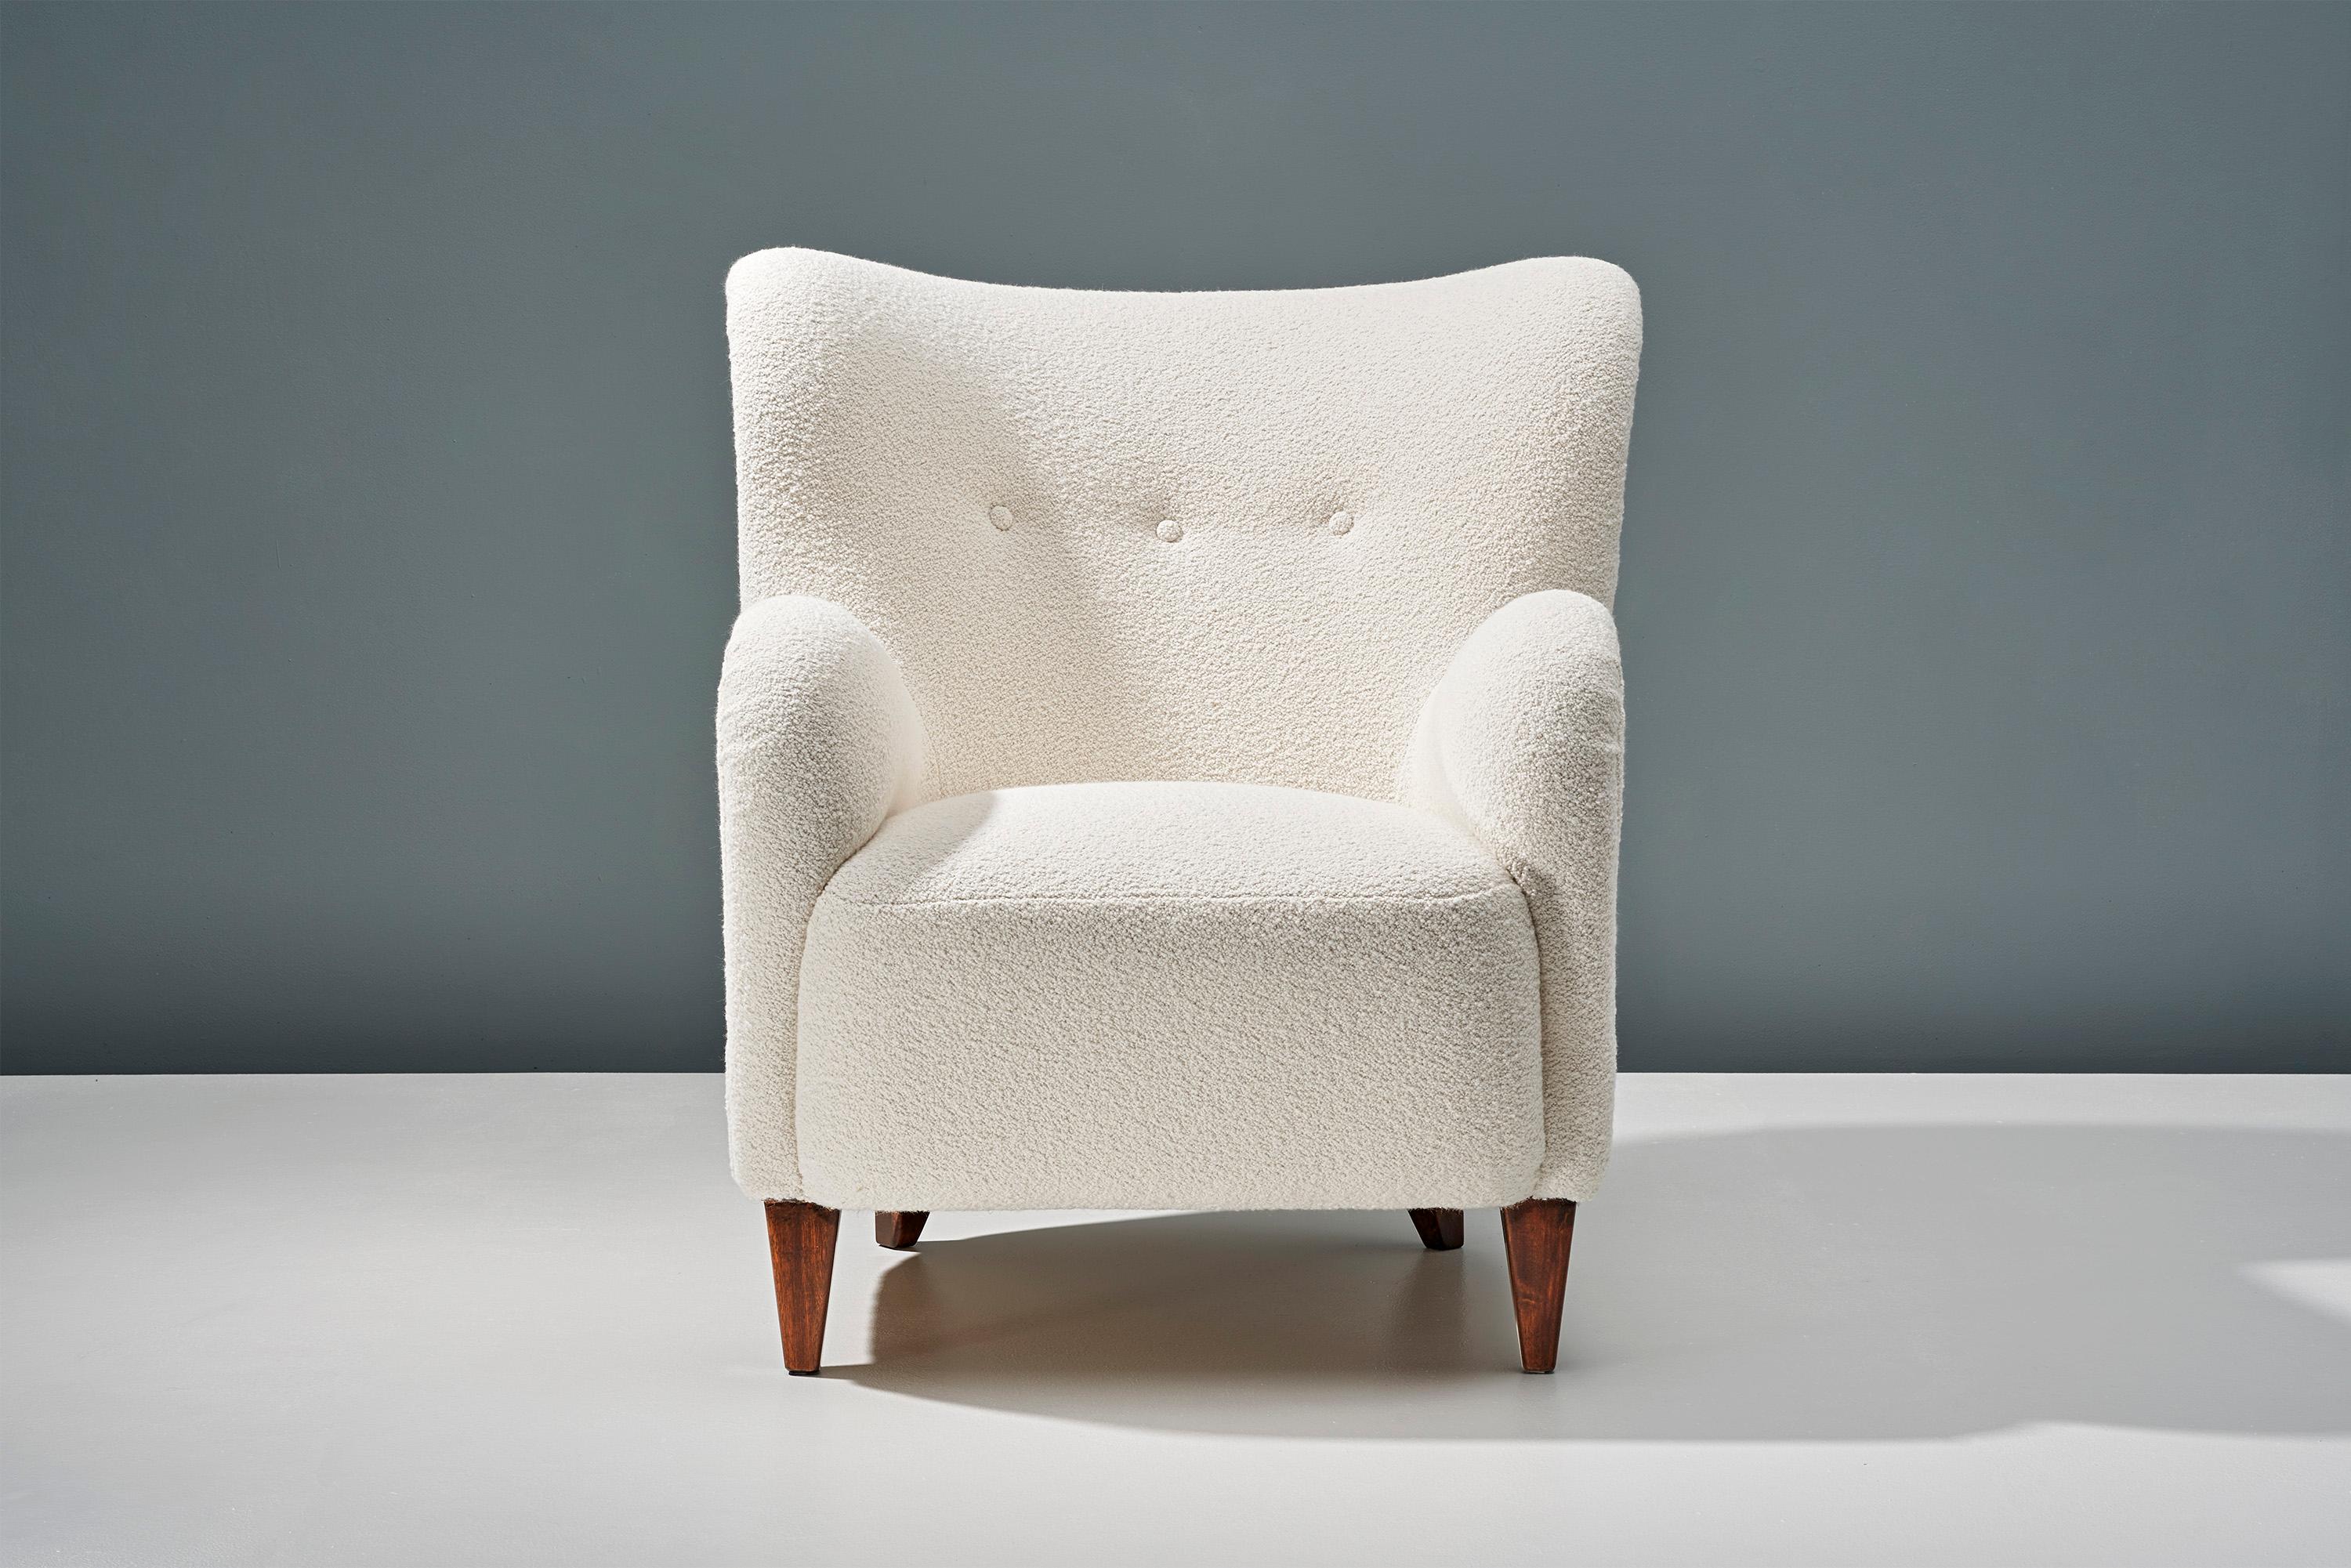 A pair of Danish Cabinetmaker 1940s lounge chairs reupholstered in luxurious cotton-wool blend off-white bouclé fabric from Chase Erwin in England. 

This pair of chairs were made in Denmark in the 1940s in the manner of Flemming Lassen, Fritz